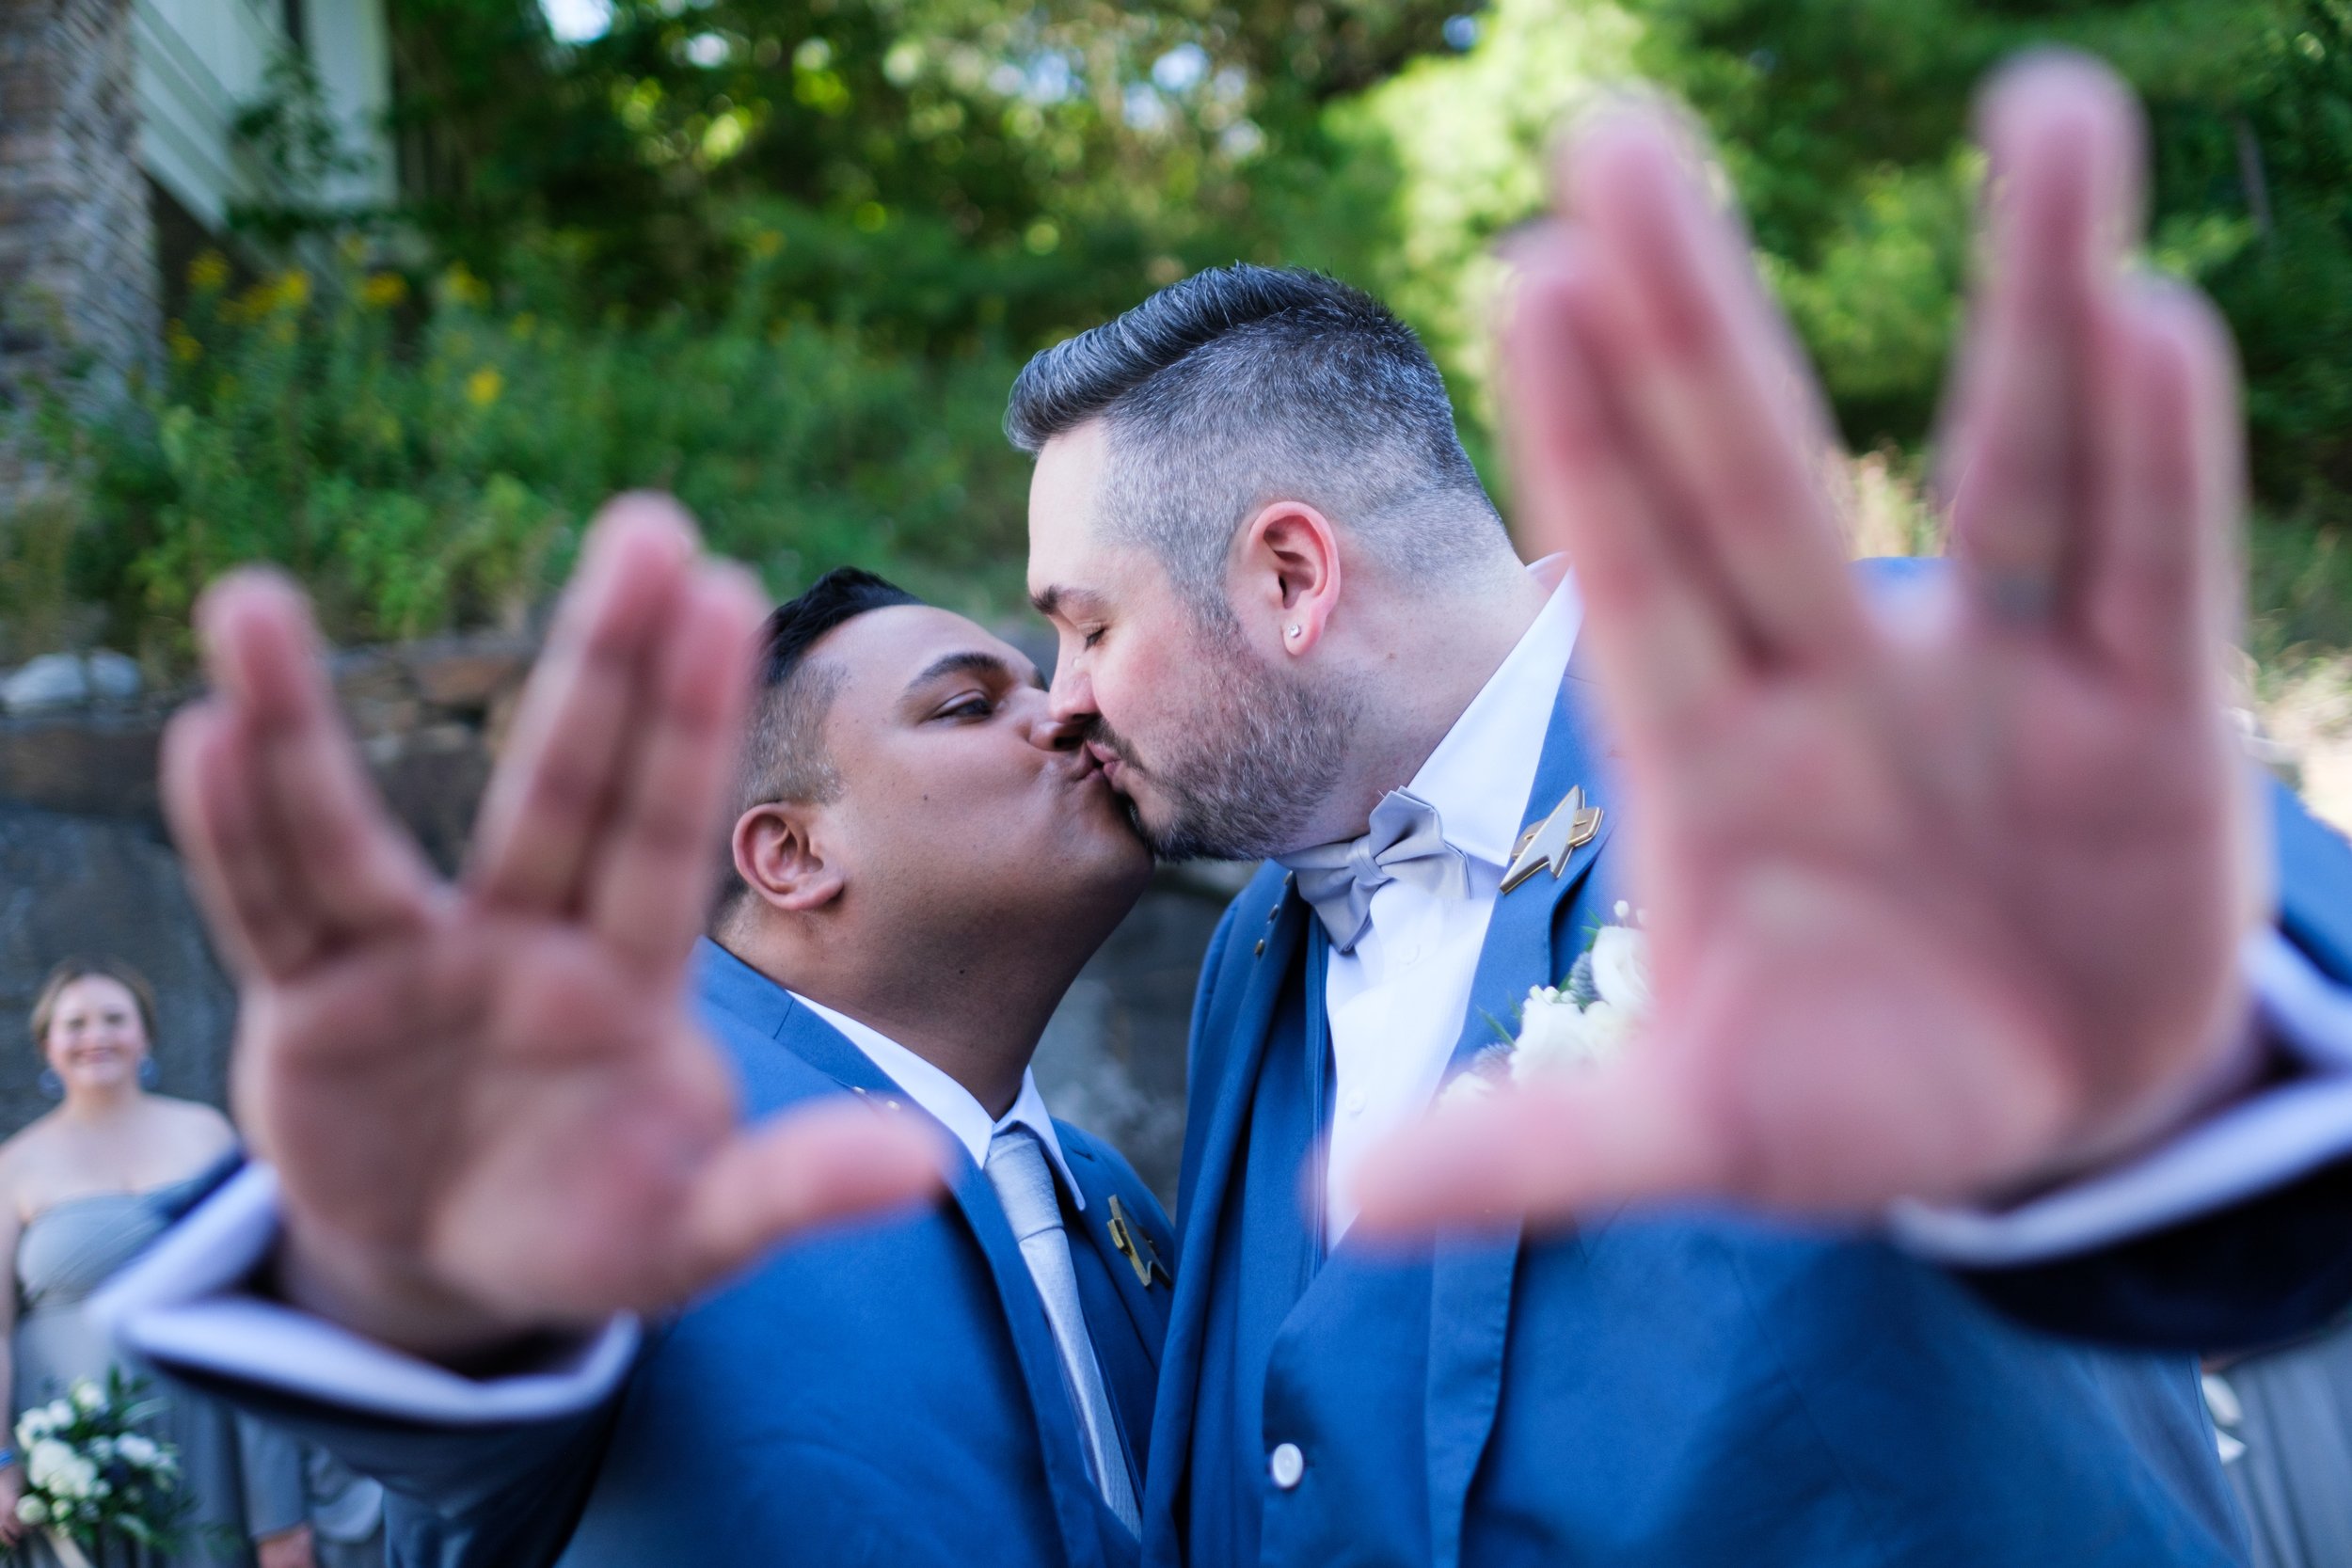  A color wedding portrait photograph of  Bryan + Adam before their outdoor  wedding ceremony at the JW Marriot The Rosseau in Muskoka by Toronto wedding photographer Scott Williams (www.scottwilliamsphotographer.com) 